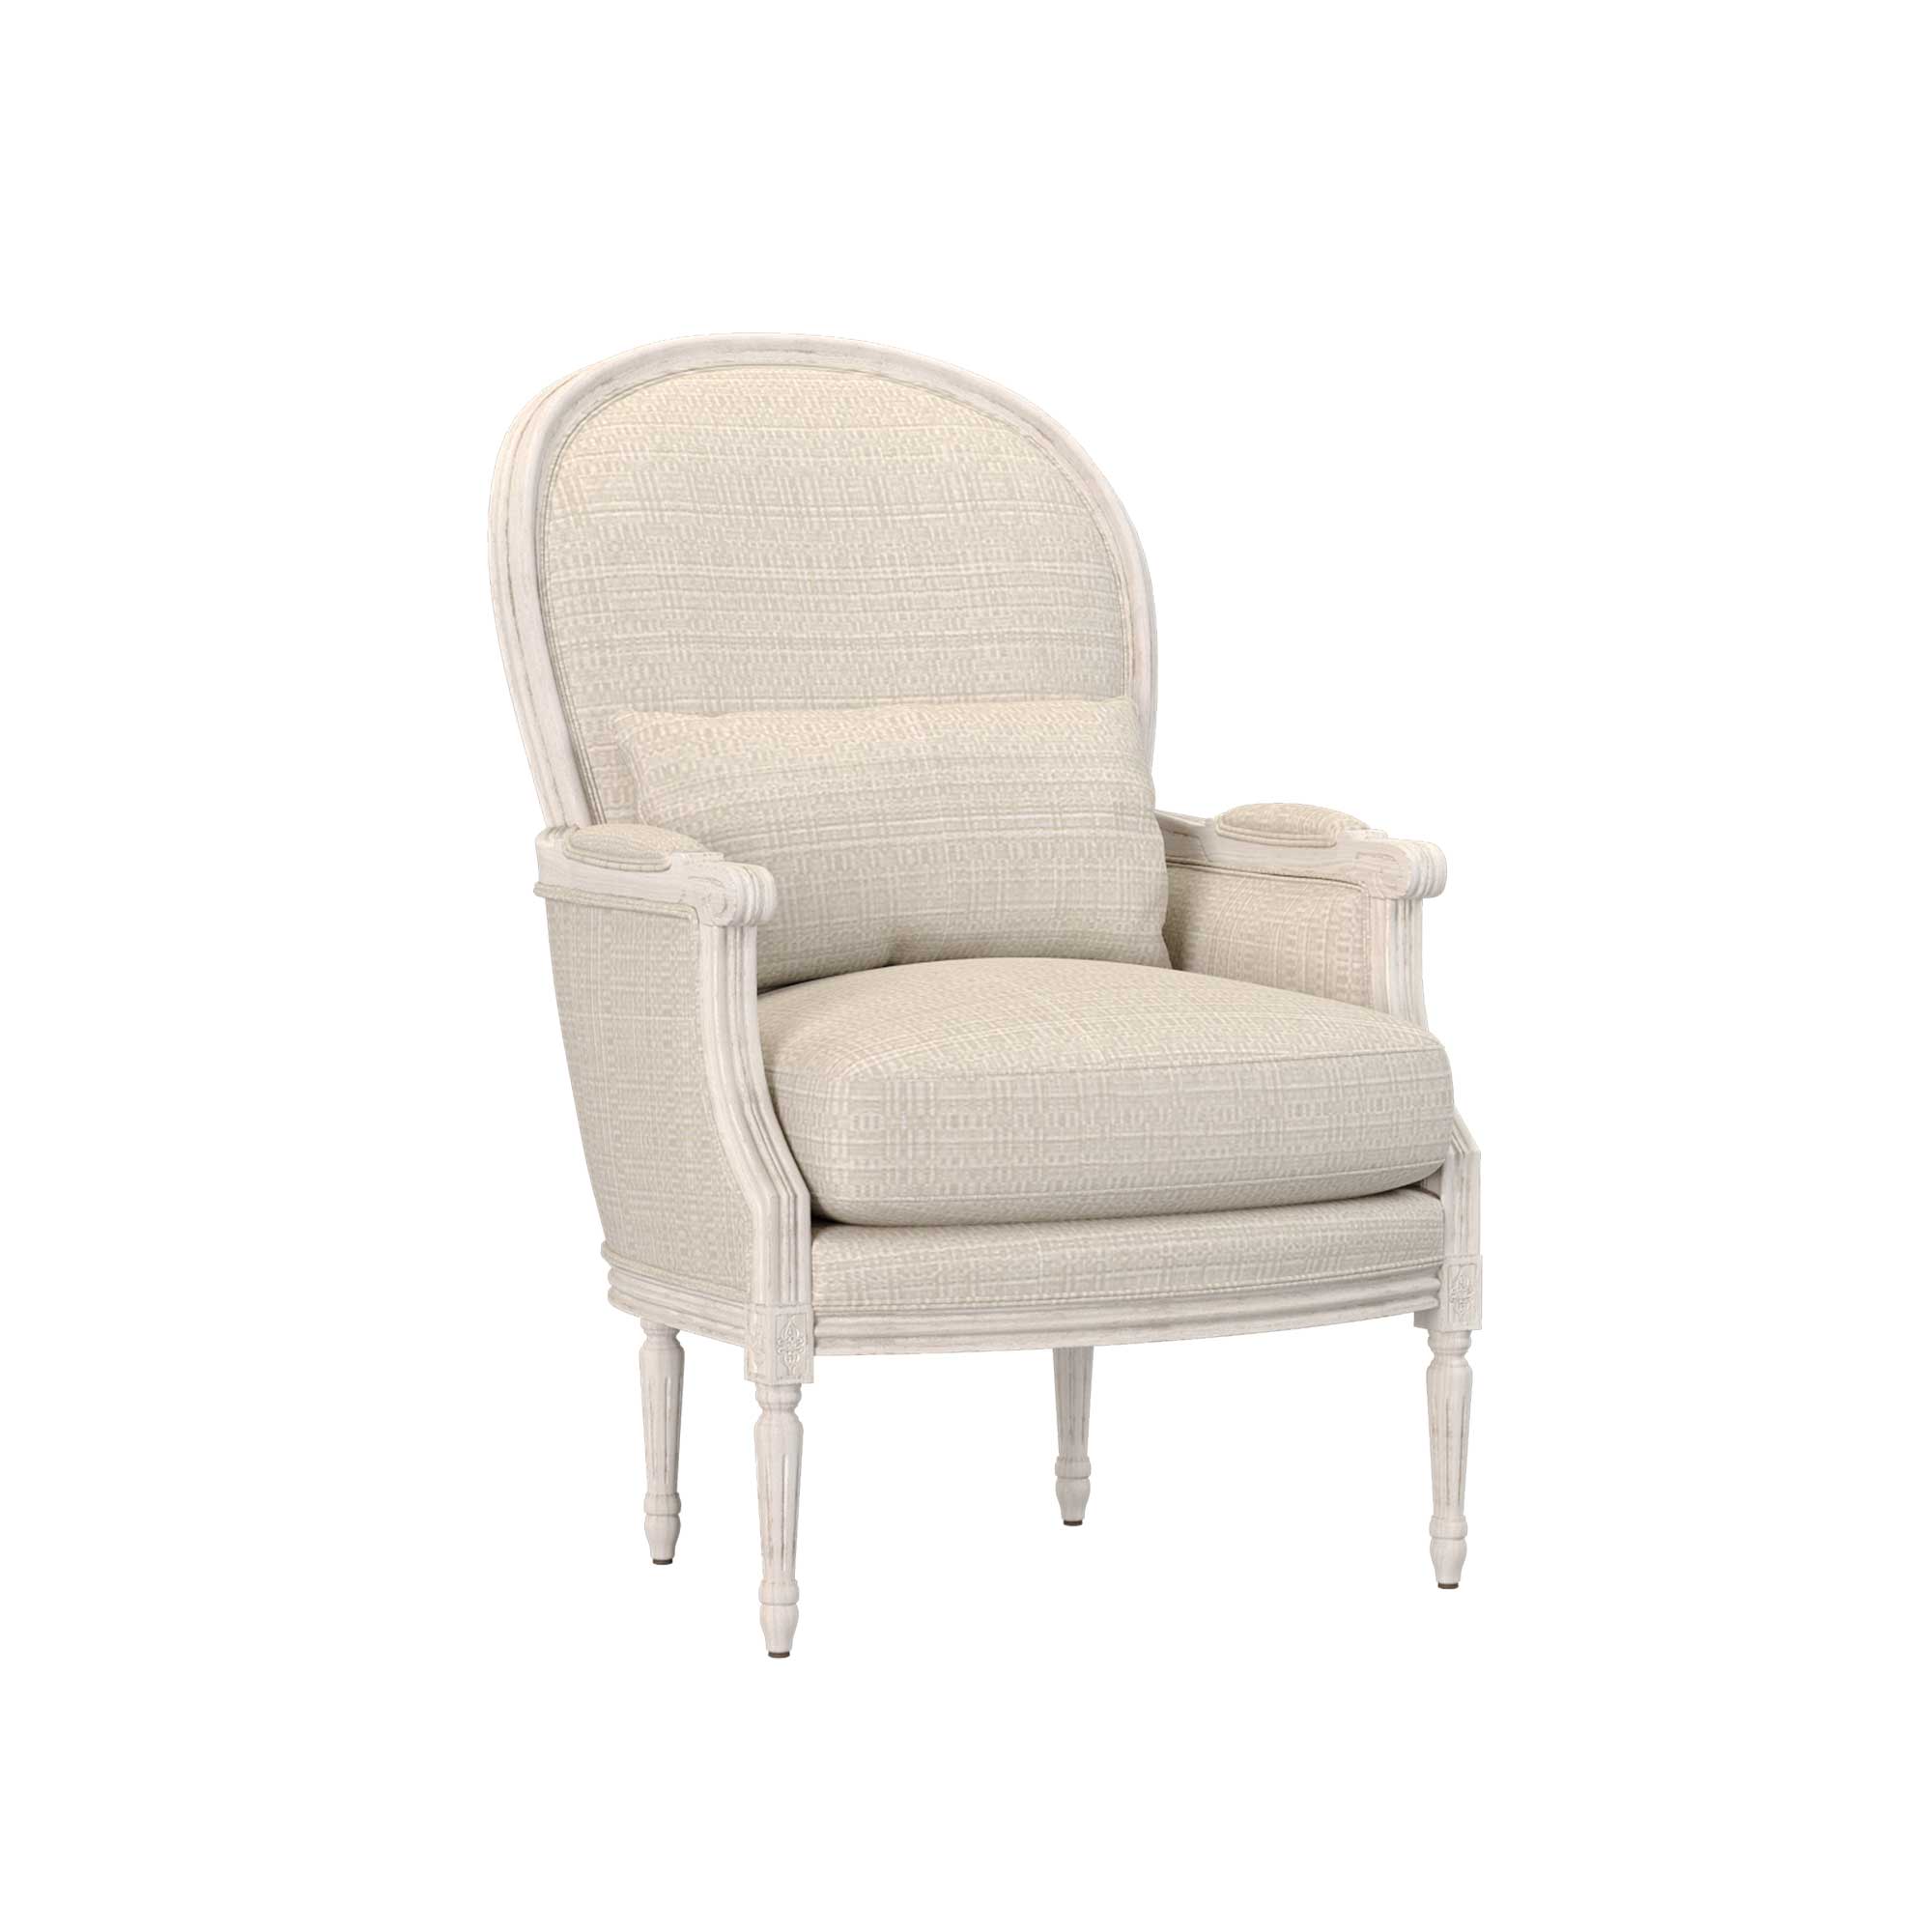 Adele Upholstered Lounge Chair in Antique Beige